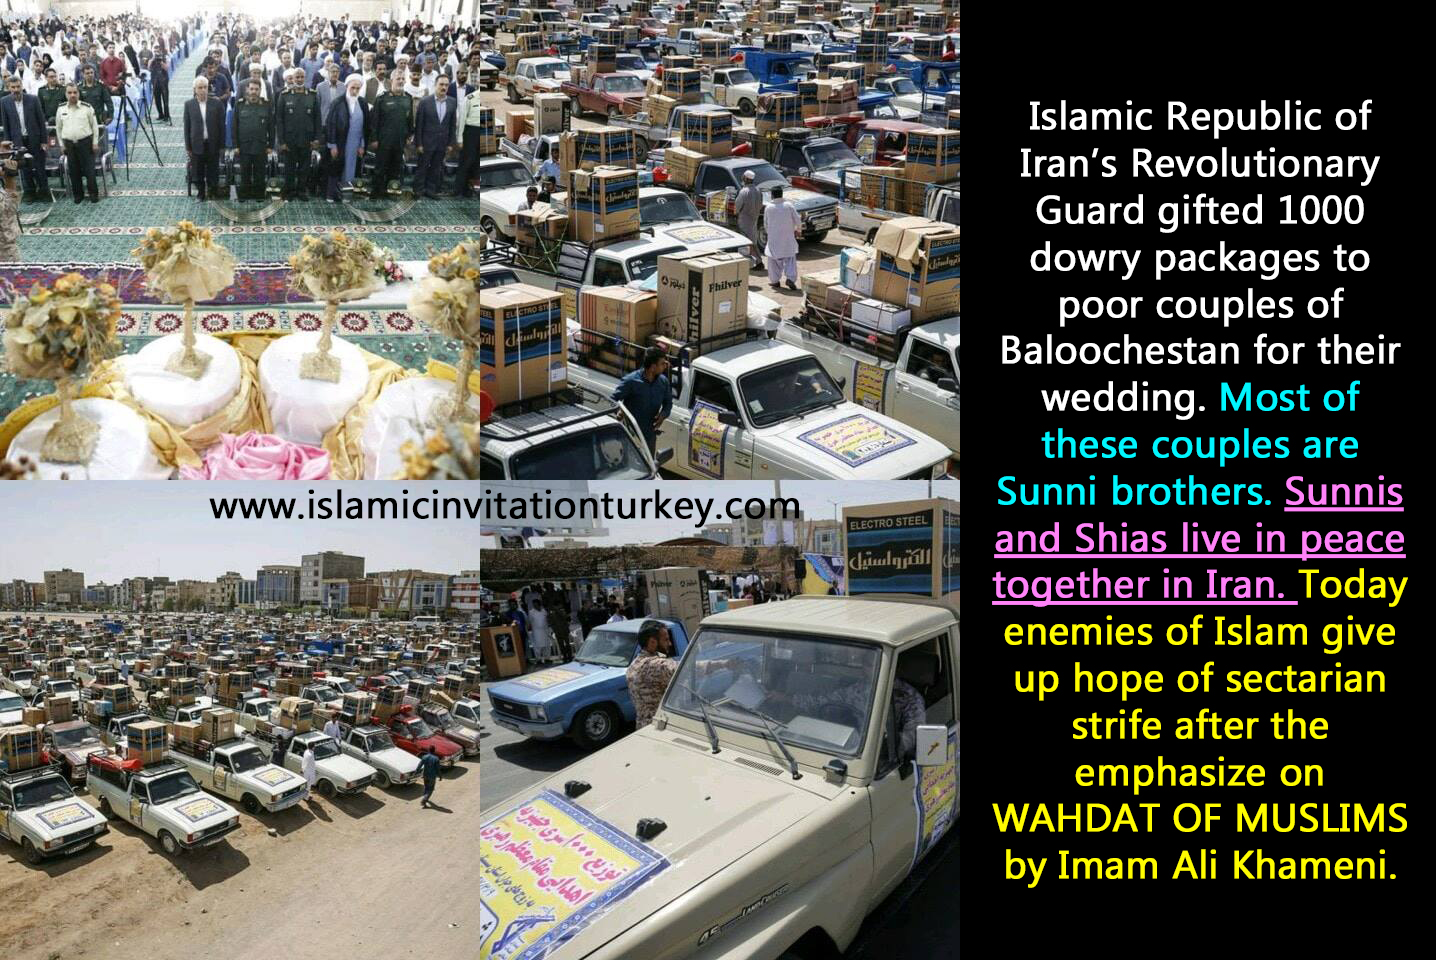 Photo of IRGC gifted 1000 dowry packages to Sunni couples for their wedding